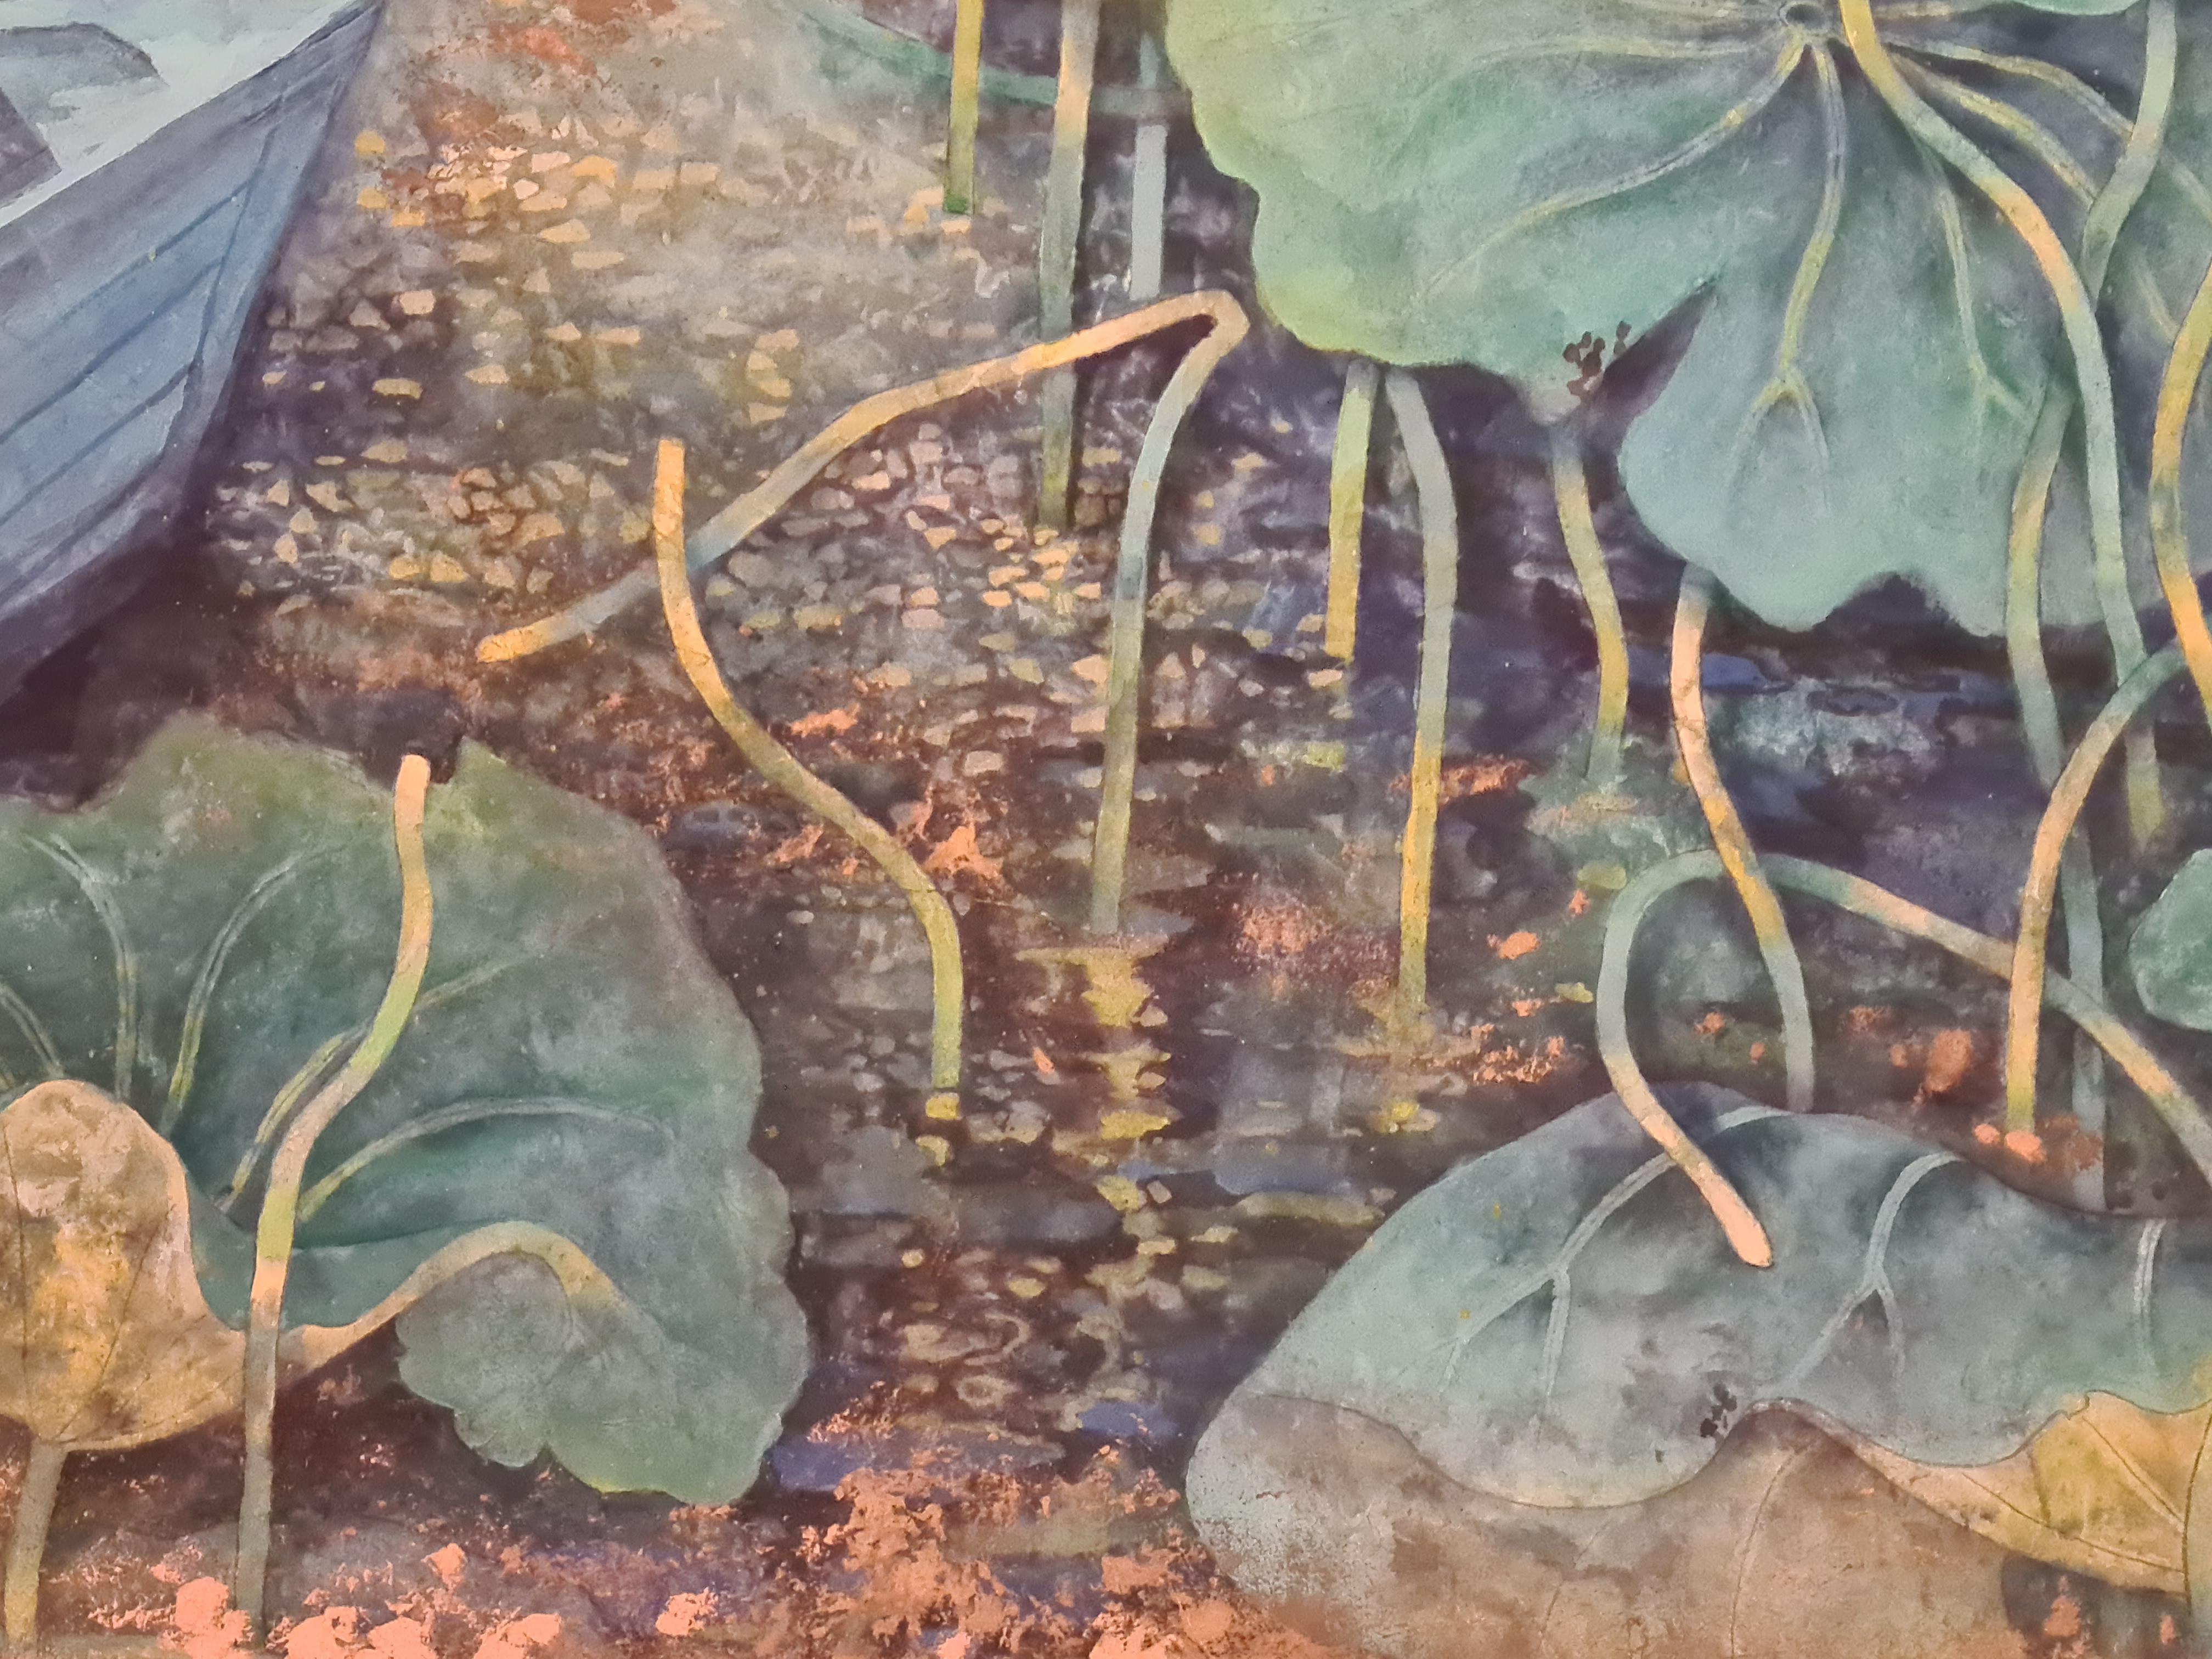 Water lillies, Hommage Zhou Dun-y,  Large Contemporary Chinese Painting on Paper - Gold Landscape Art by Shao